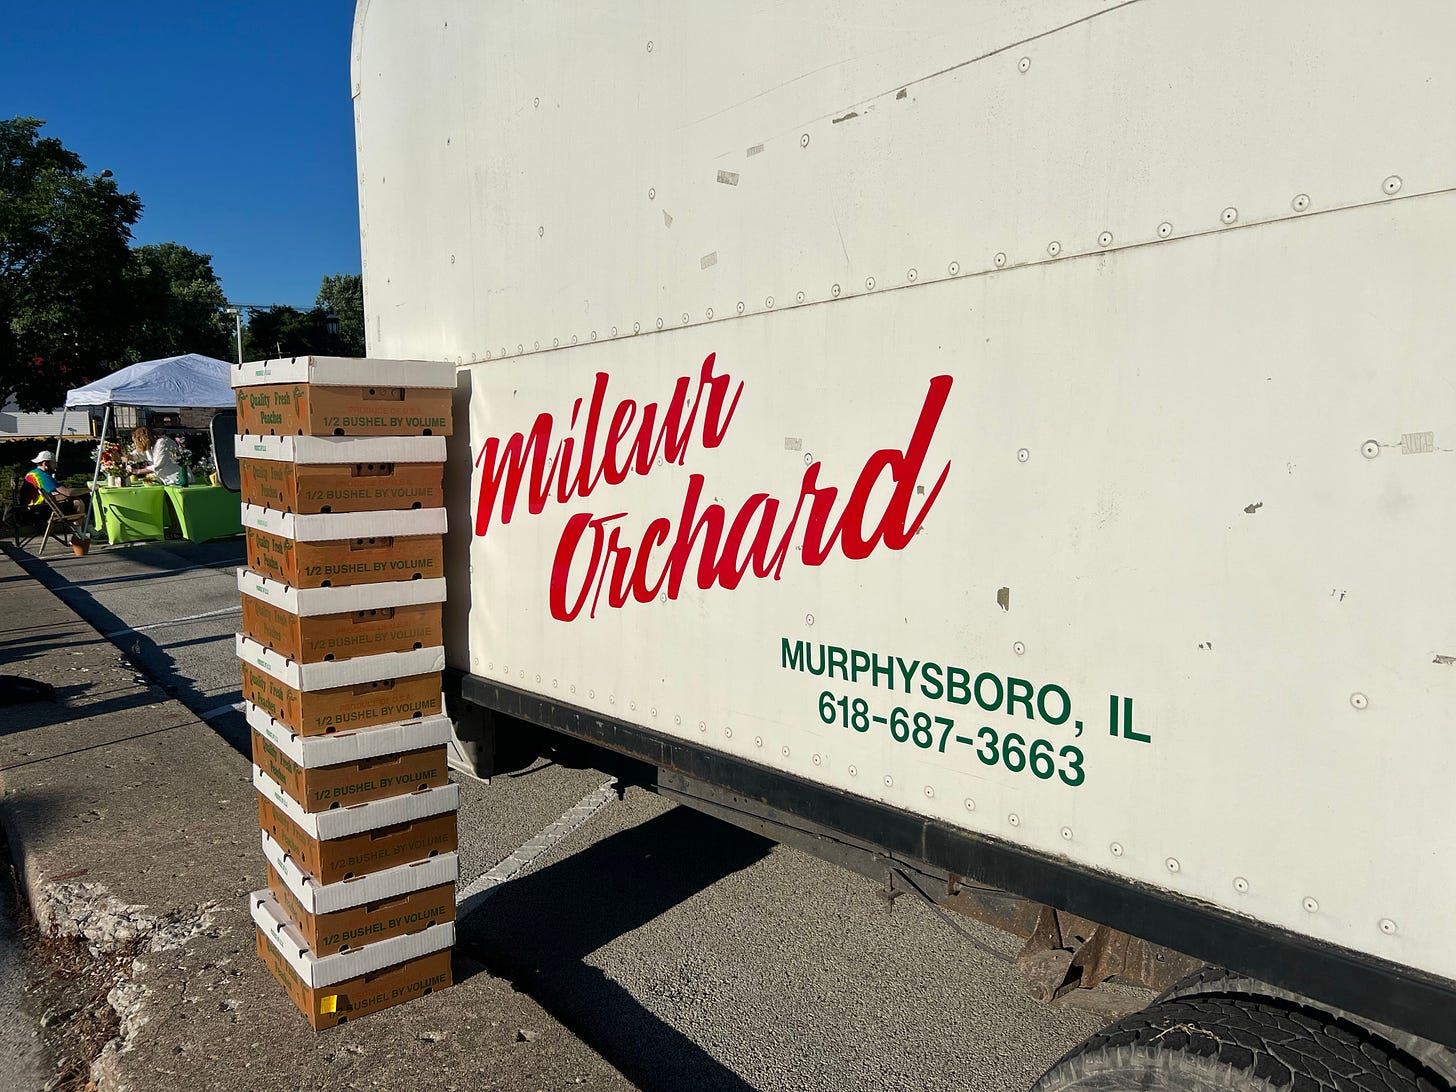 A stack of peach boxes against a truck that says Mileur Orchard Murphysboro, IL 618-687-3663